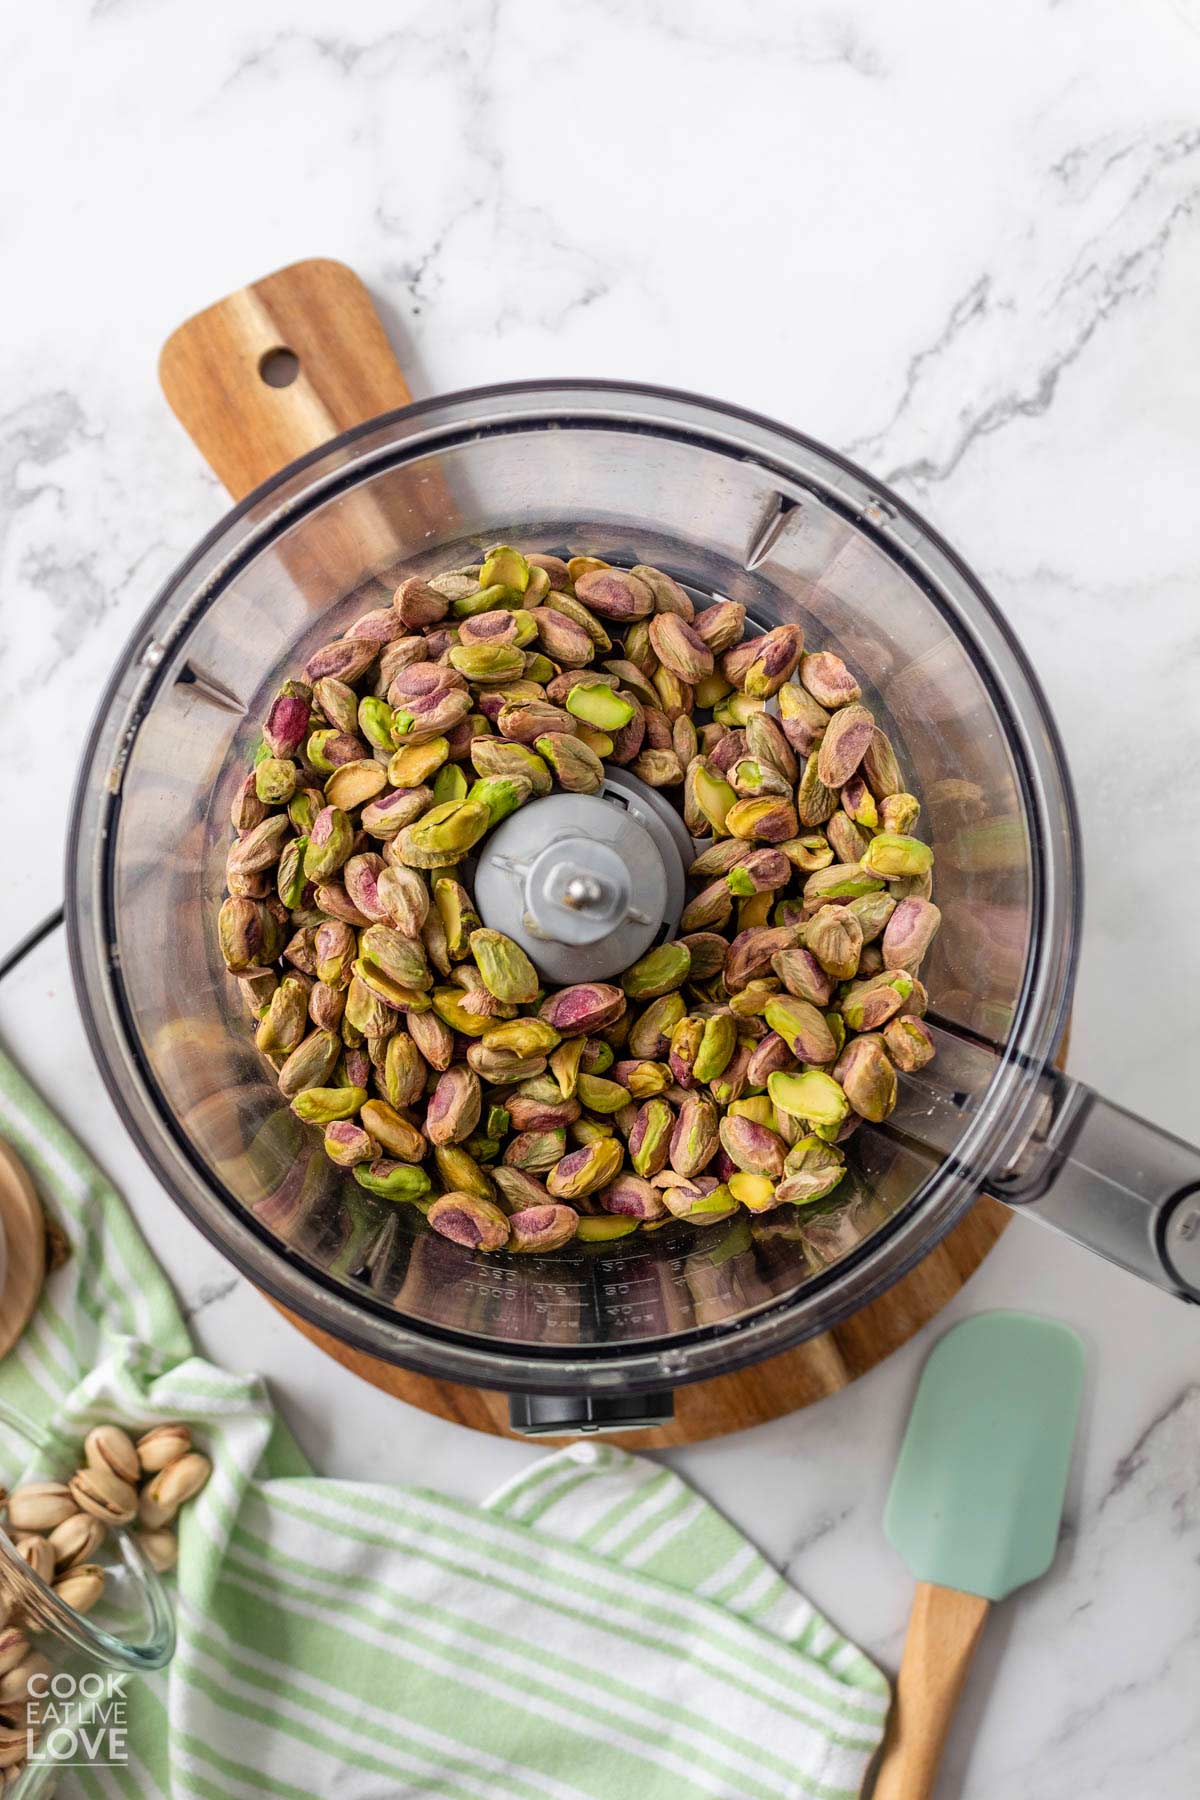 Pistachios in the food processor.